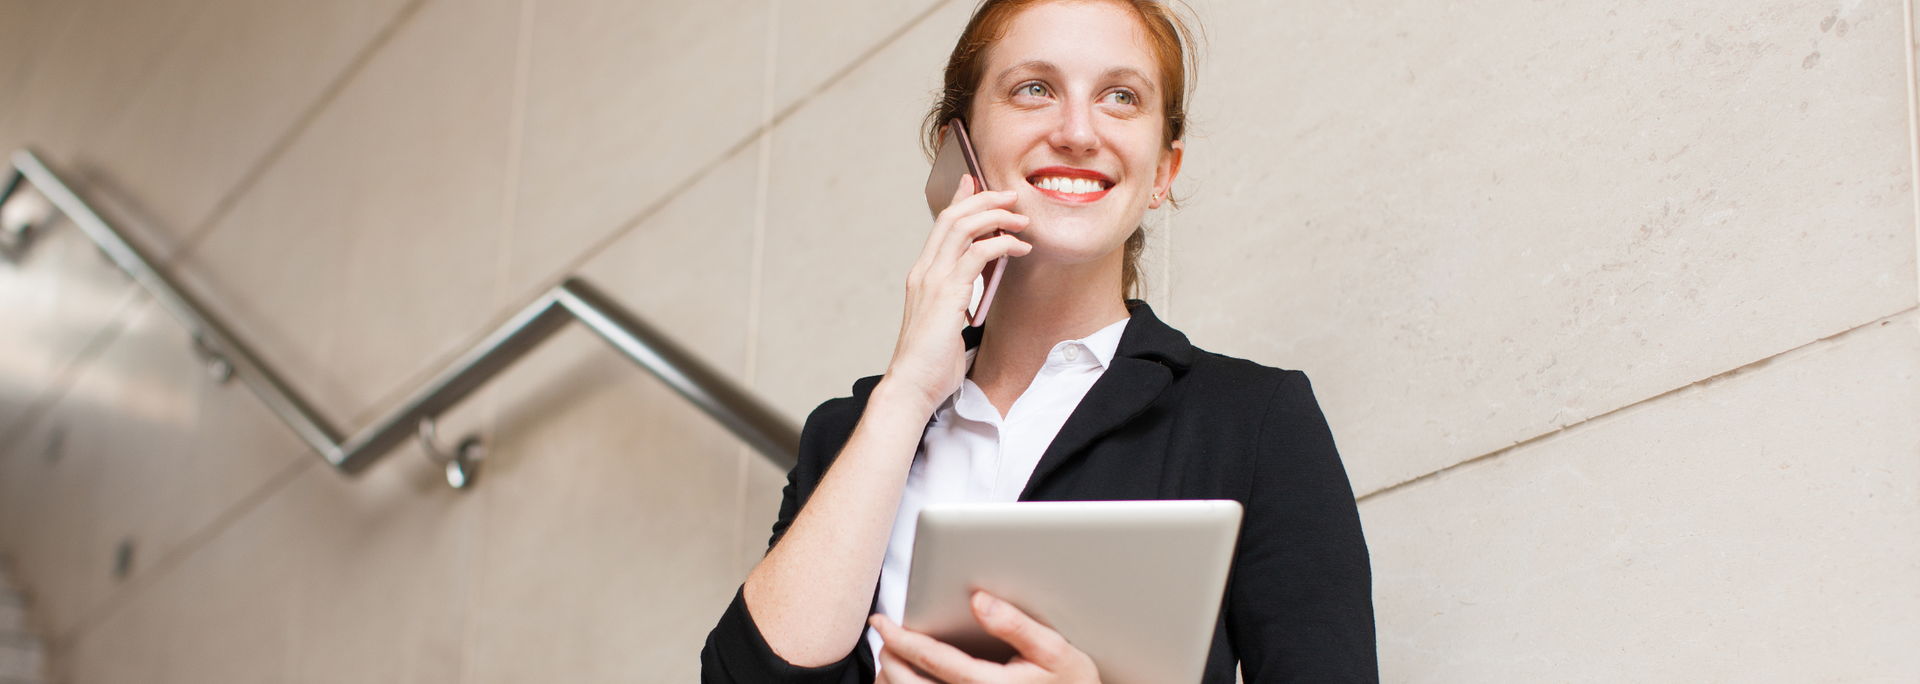 Picture of a businessperson smiling on the phone.